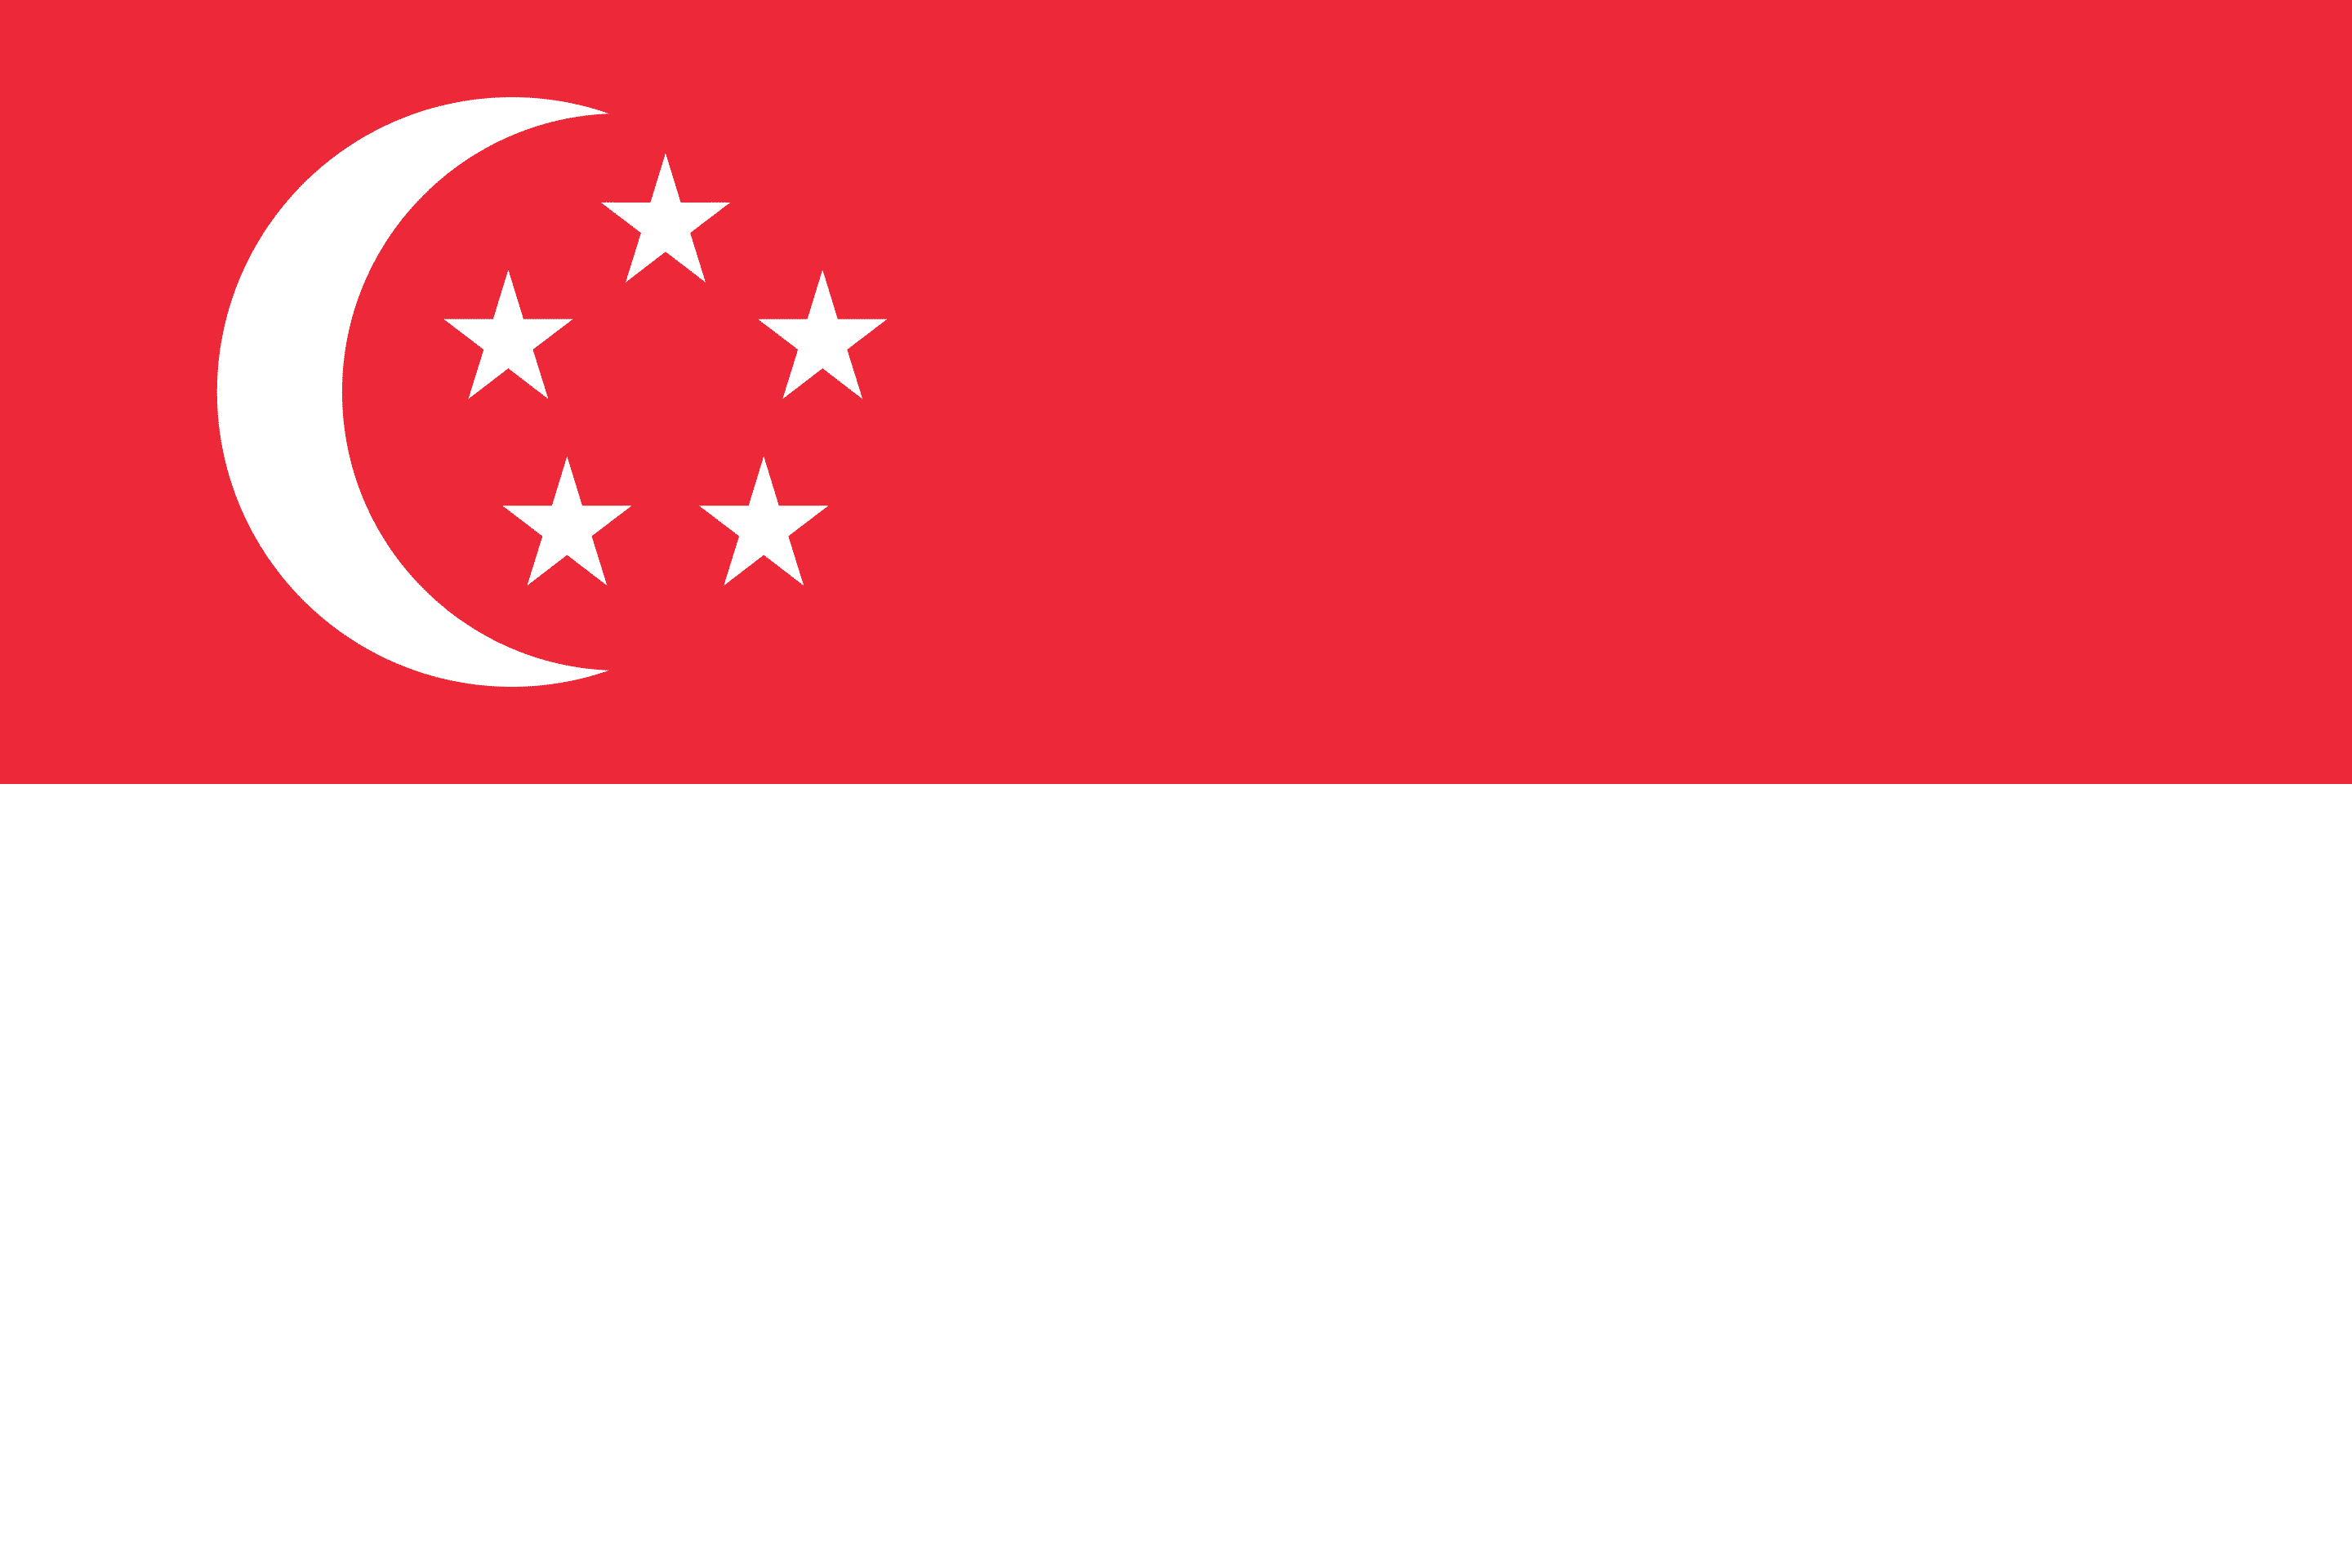 Facts about Singapore